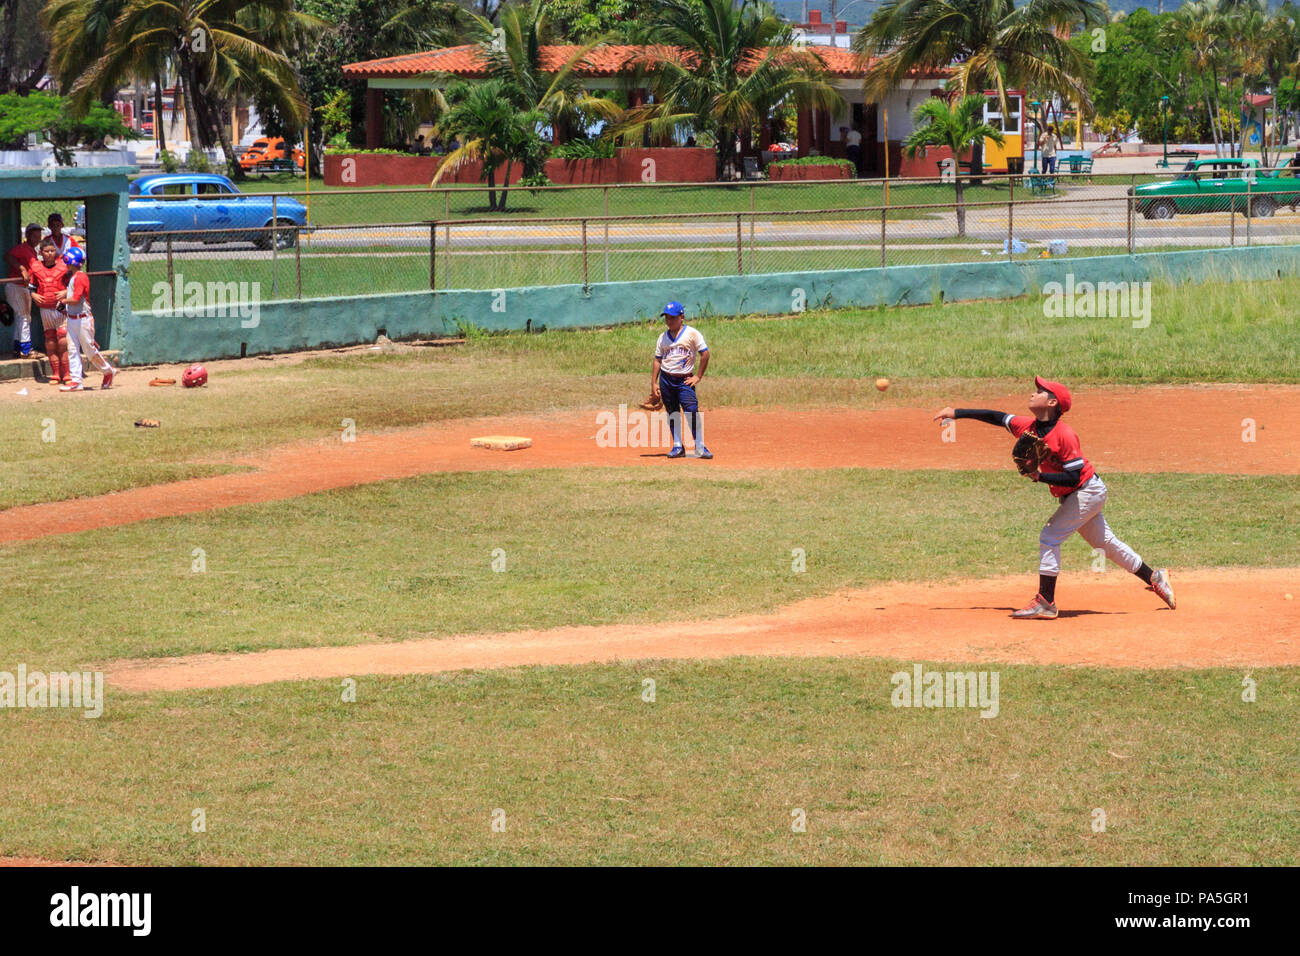 Kids and teenagers play in a baseball game for team selection in Mantanzas baseball ground, Cuba Stock Photo